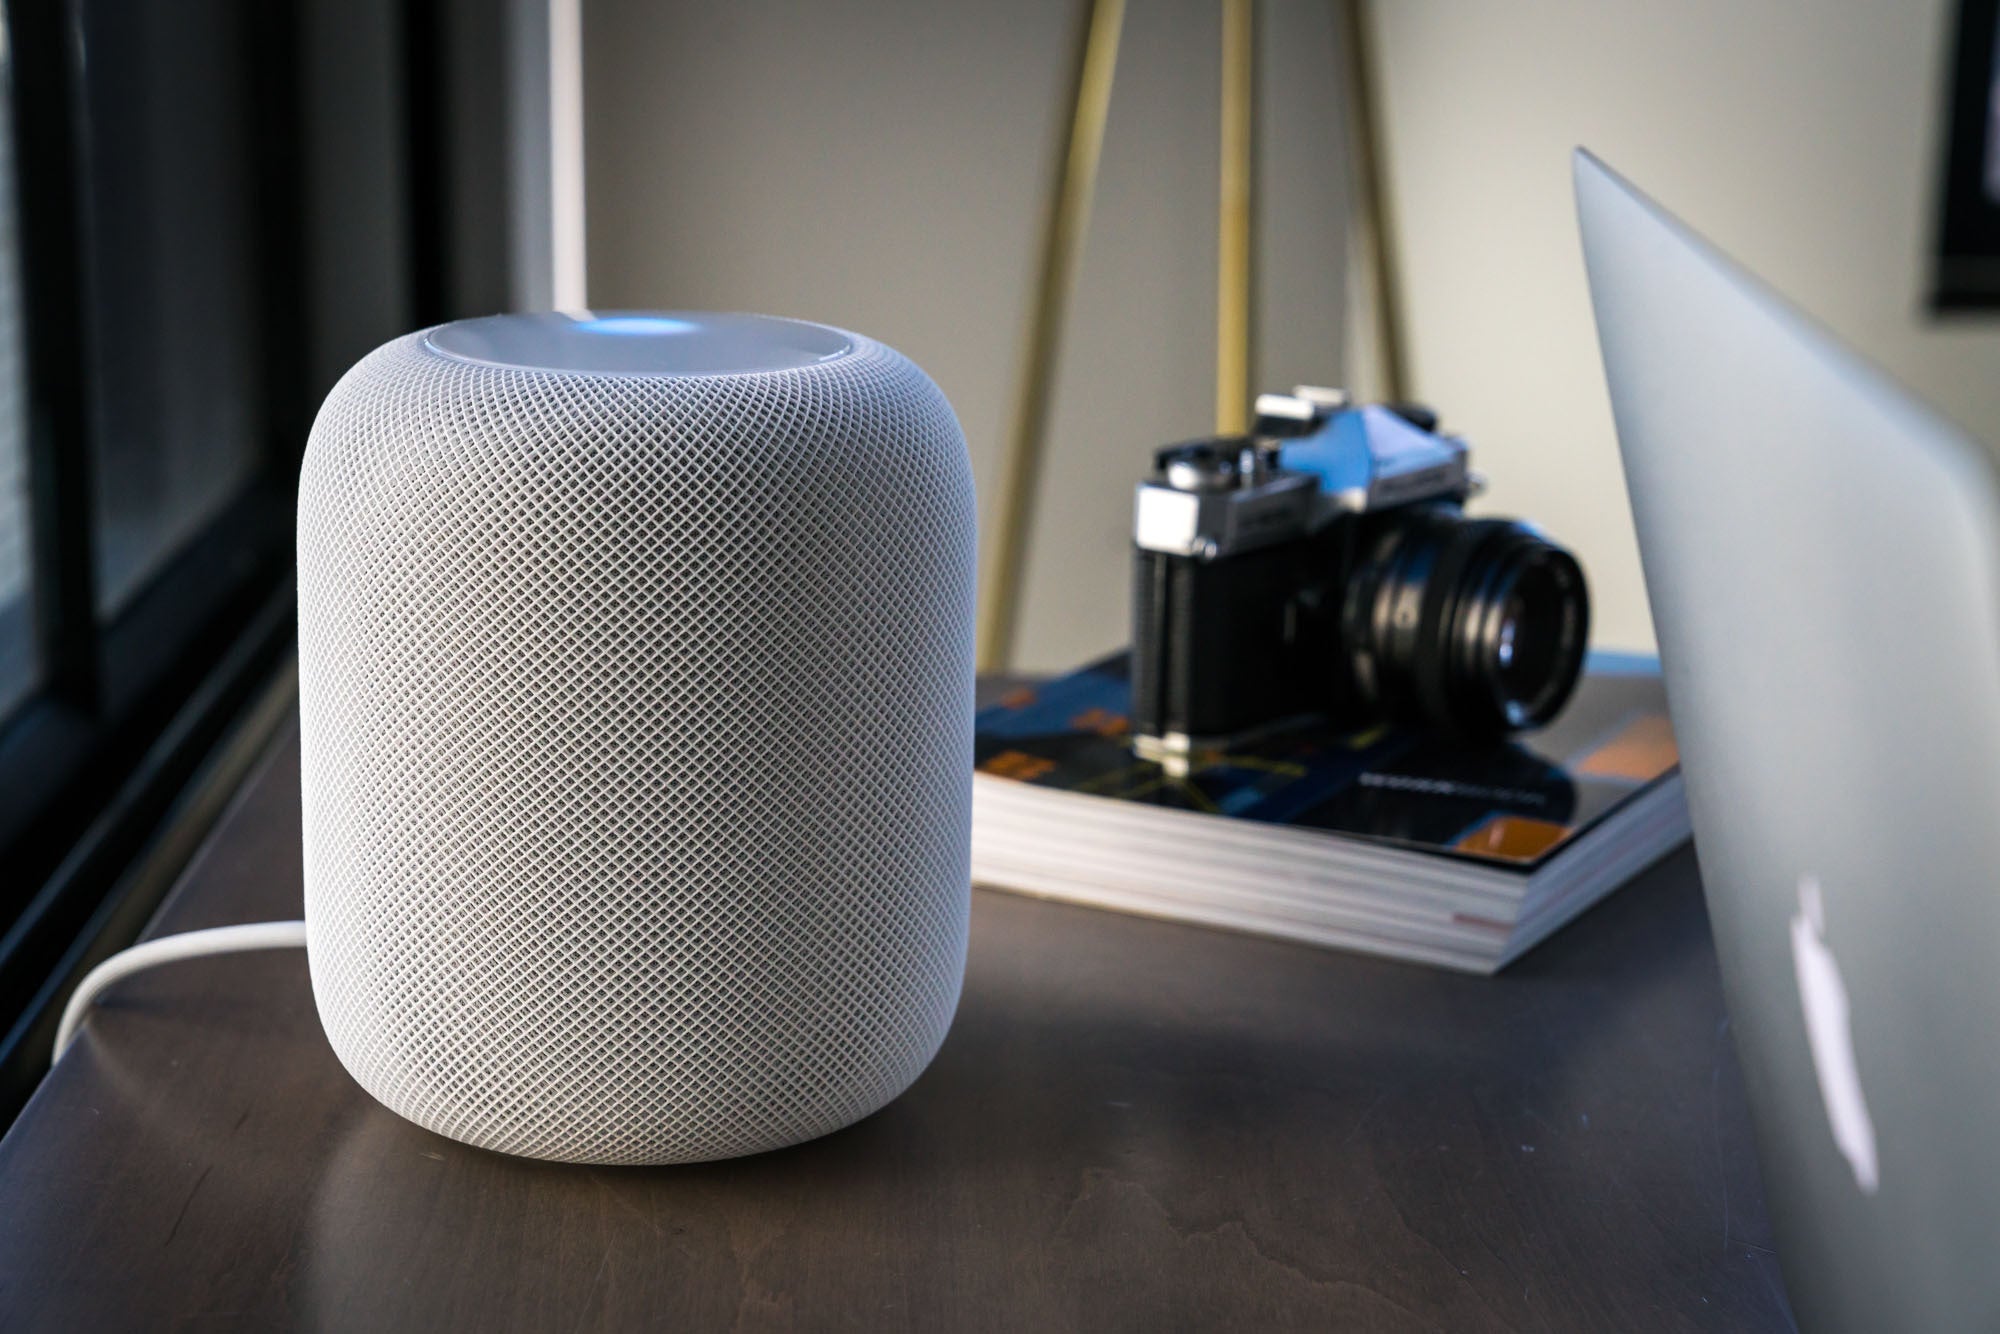 Advanced Data Protection has created a problem for HomePods, heres how to fix